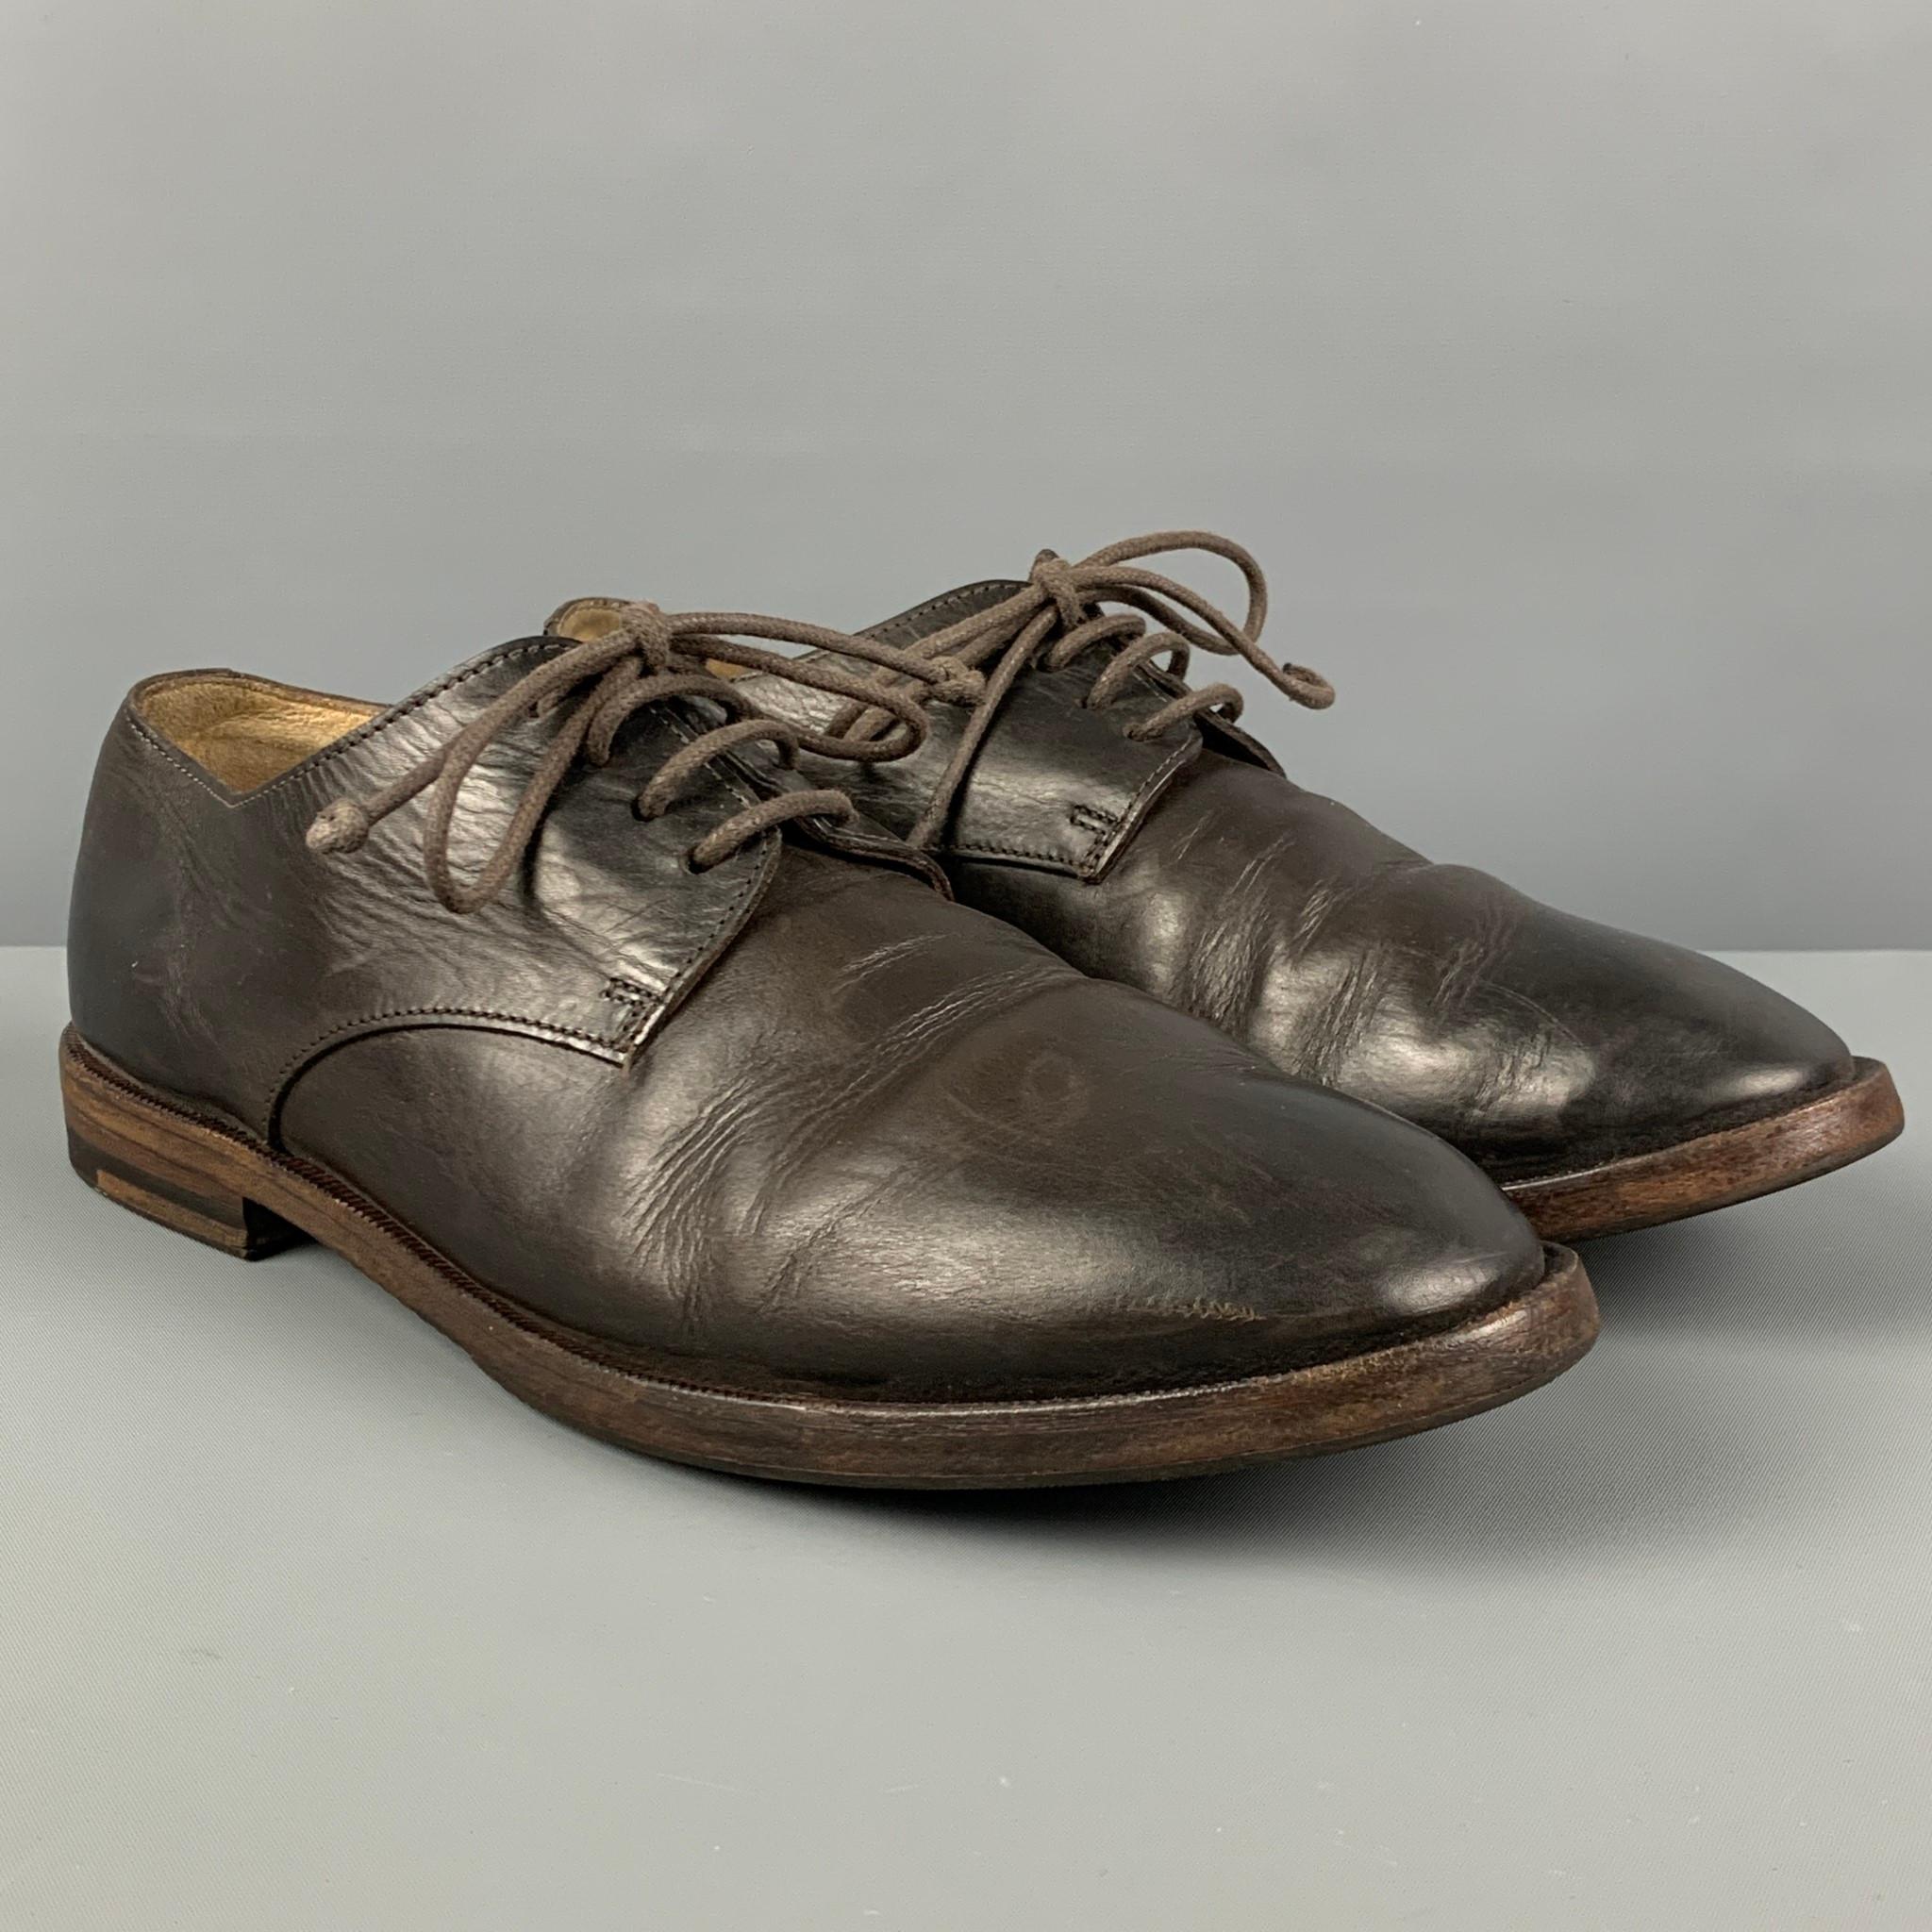 MARSELL shoes comes in a dark brown leather featuring a round toe and a lace up closure. Made in Italy. 

Good Pre-Owned Condition. Light wear. As-is.
Marked: 41

Outsole: 11.5 in. x 4 in. 